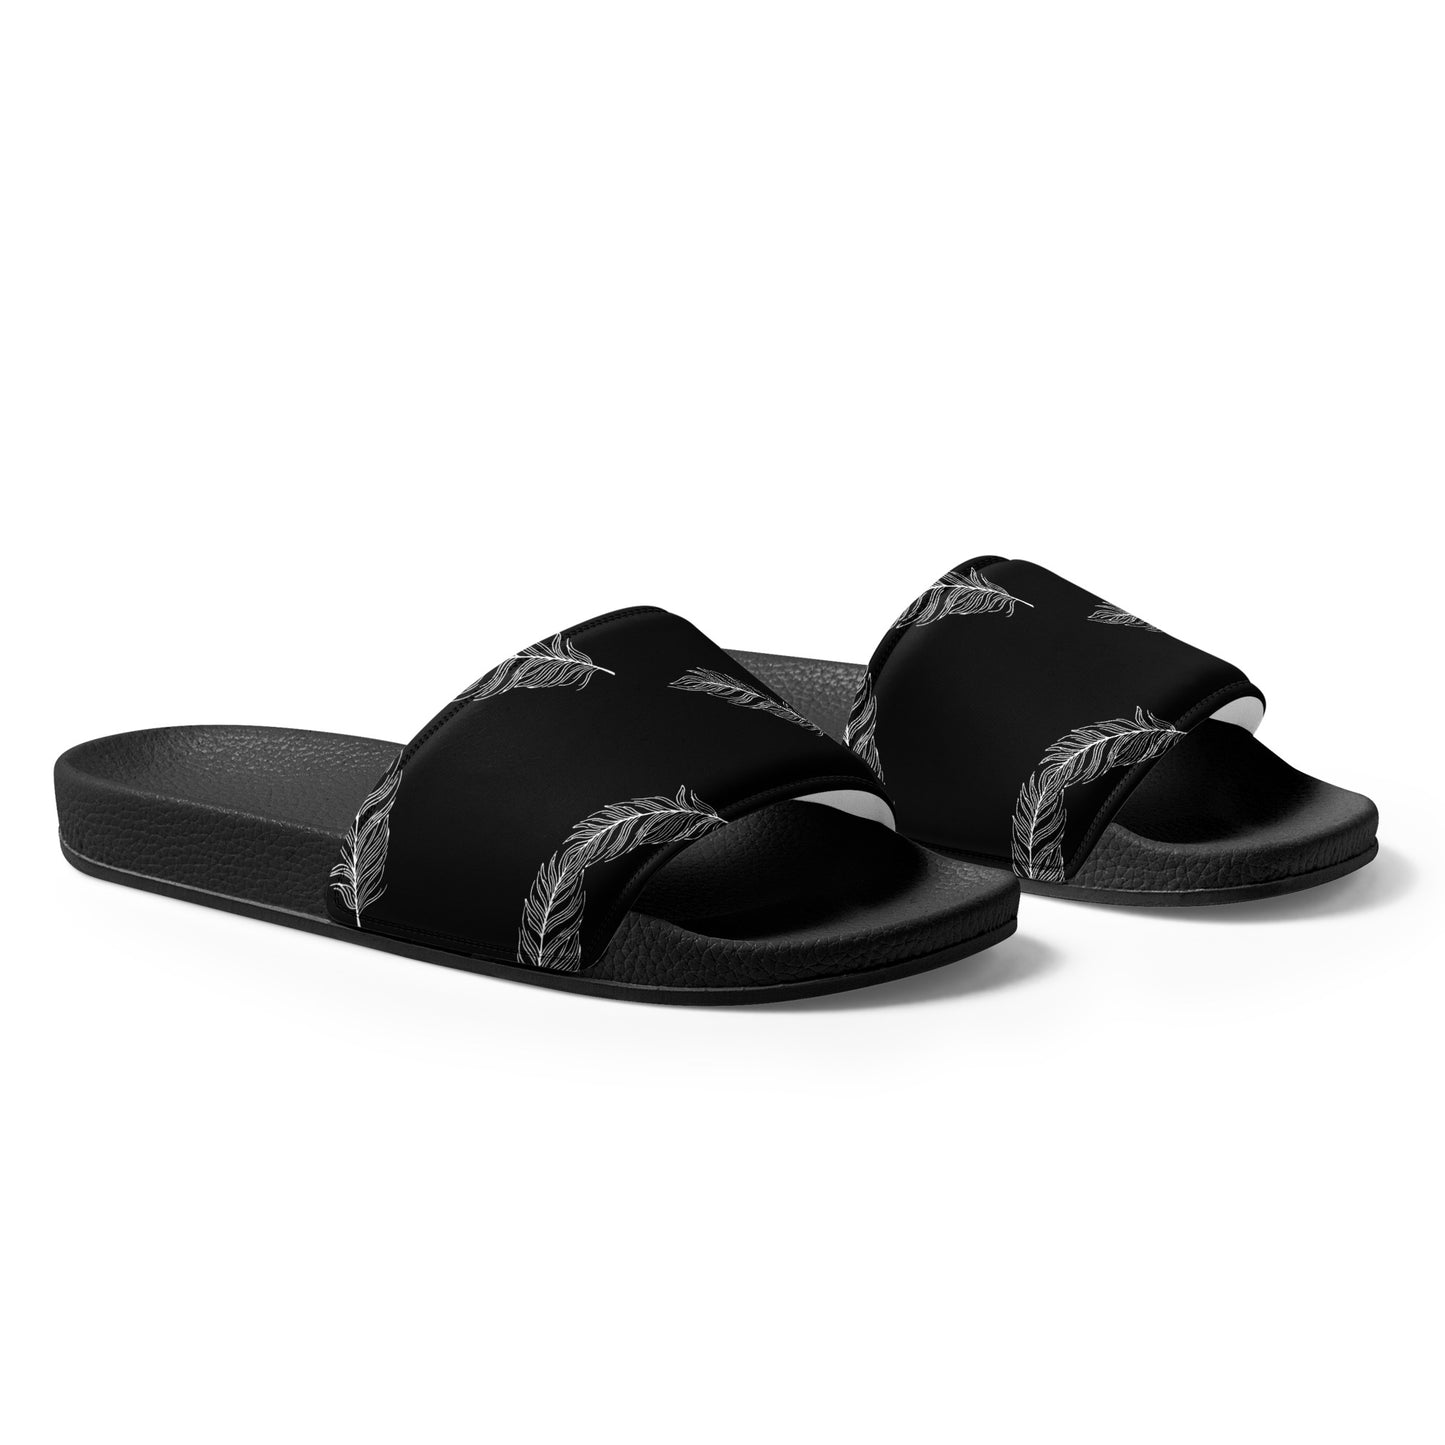 Ethereal Plumes Women's Slides